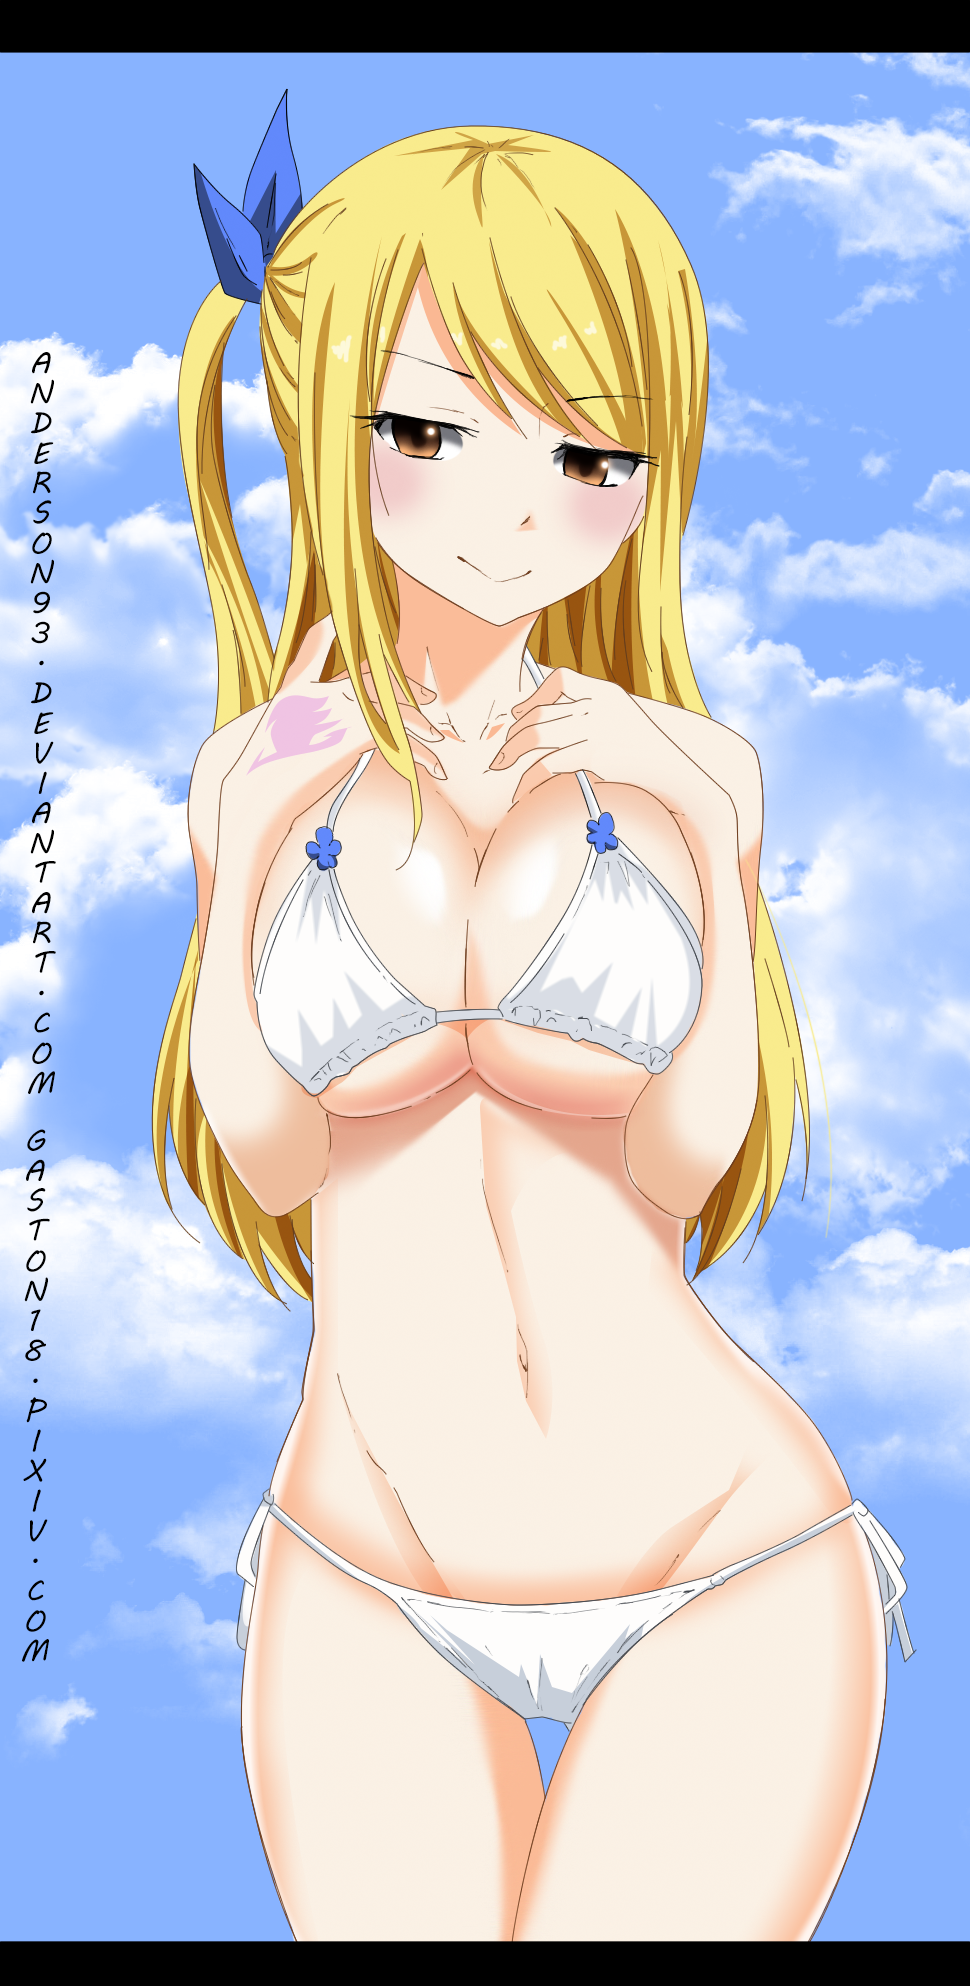 Fairy Tail - Sexy Bikini Lucy by Anderson93 on DeviantArt.